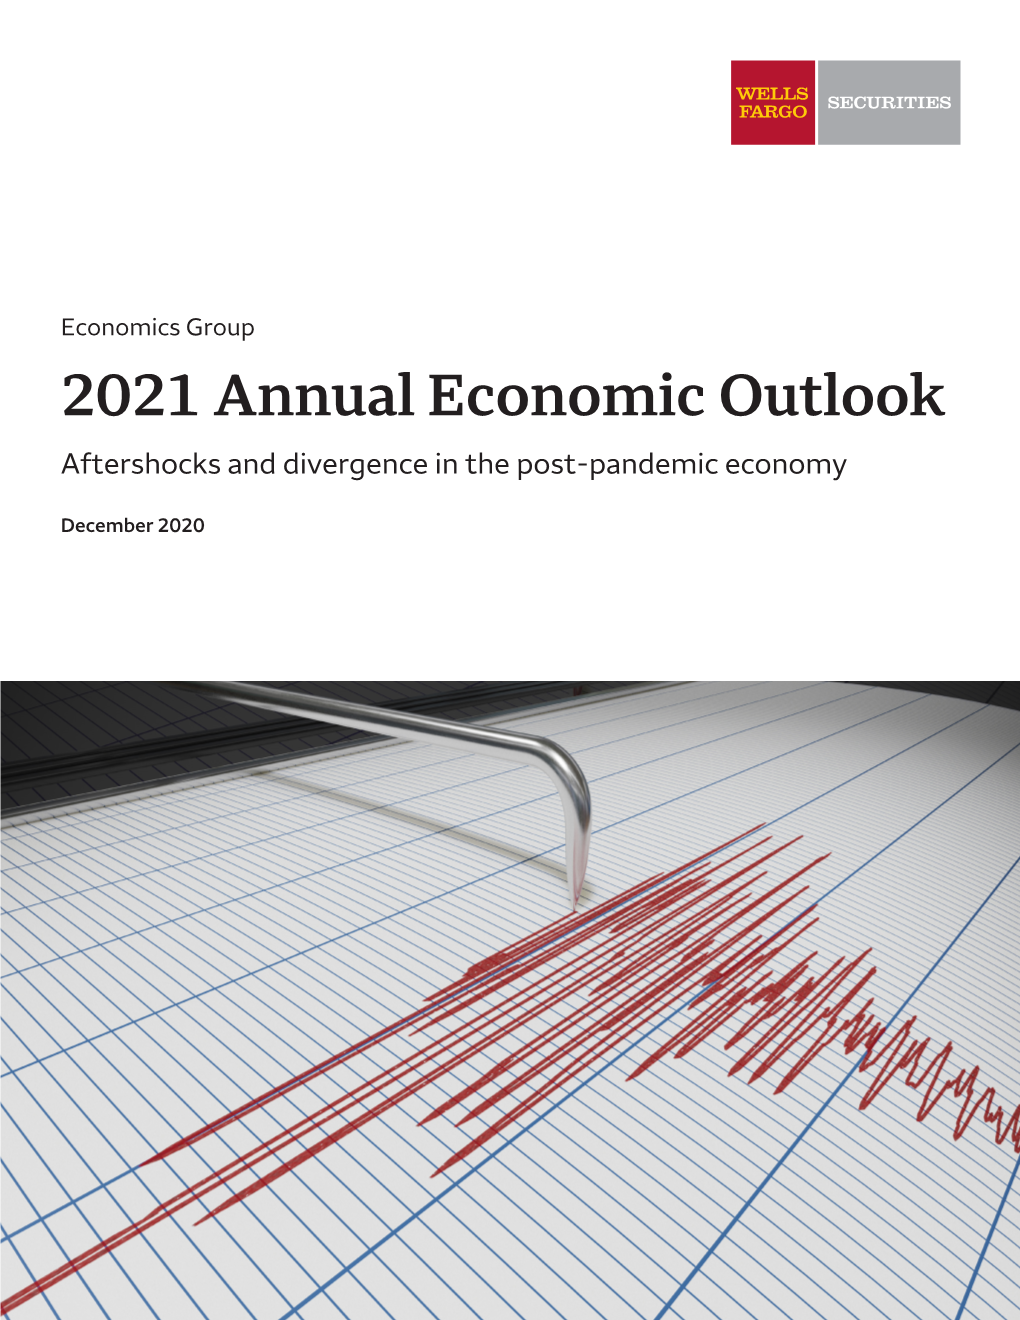 2021 Annual Economic Outlook Aftershocks and Divergence in the Post-Pandemic Economy